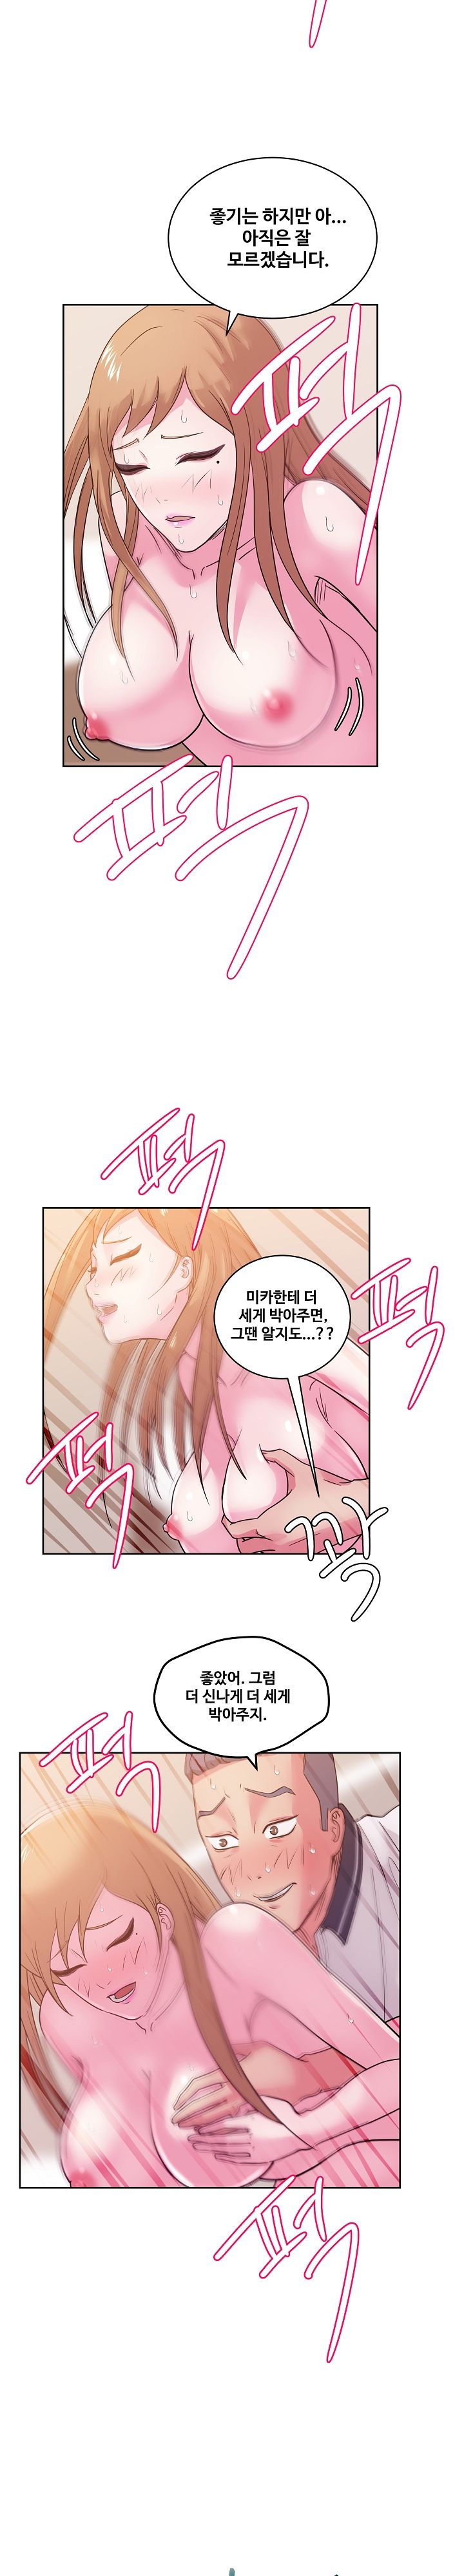 Sooyung Comic Shop Raw - Chapter 33 Page 3